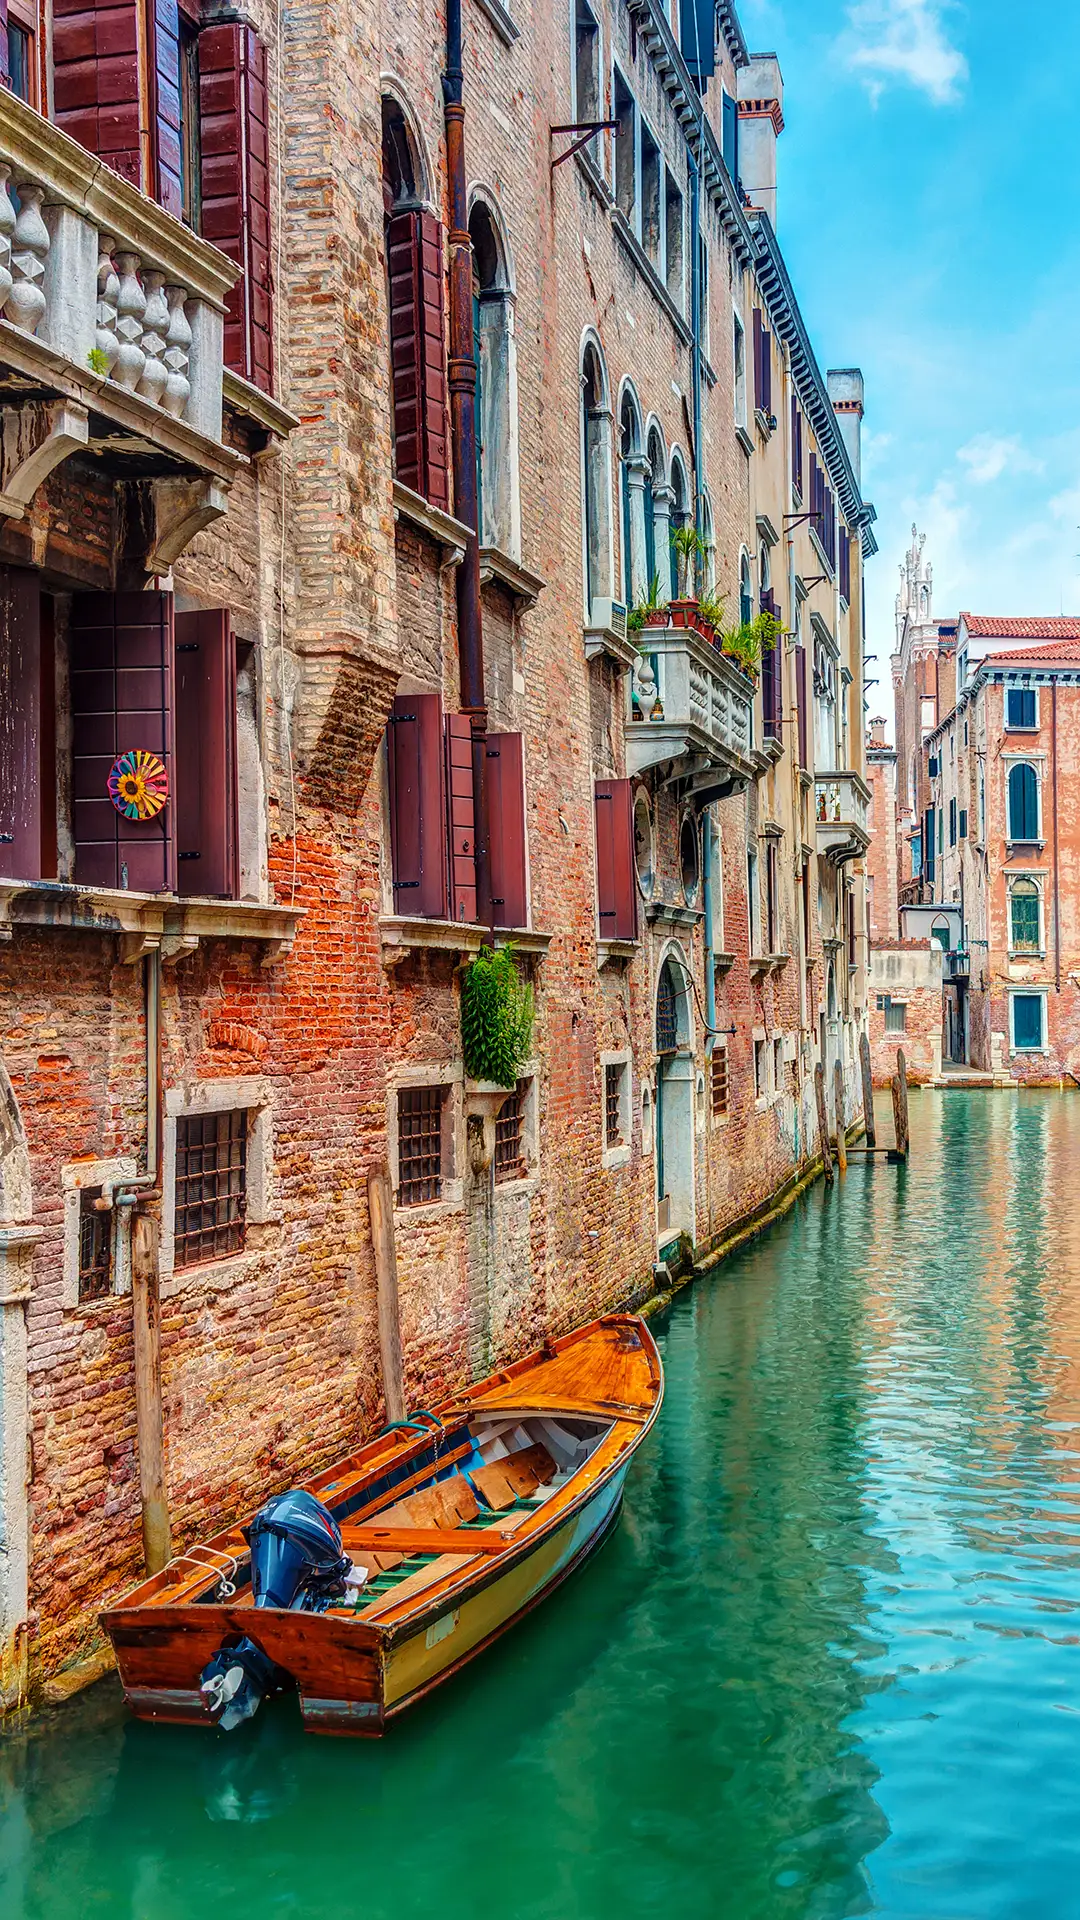 View down a canal in Venice.